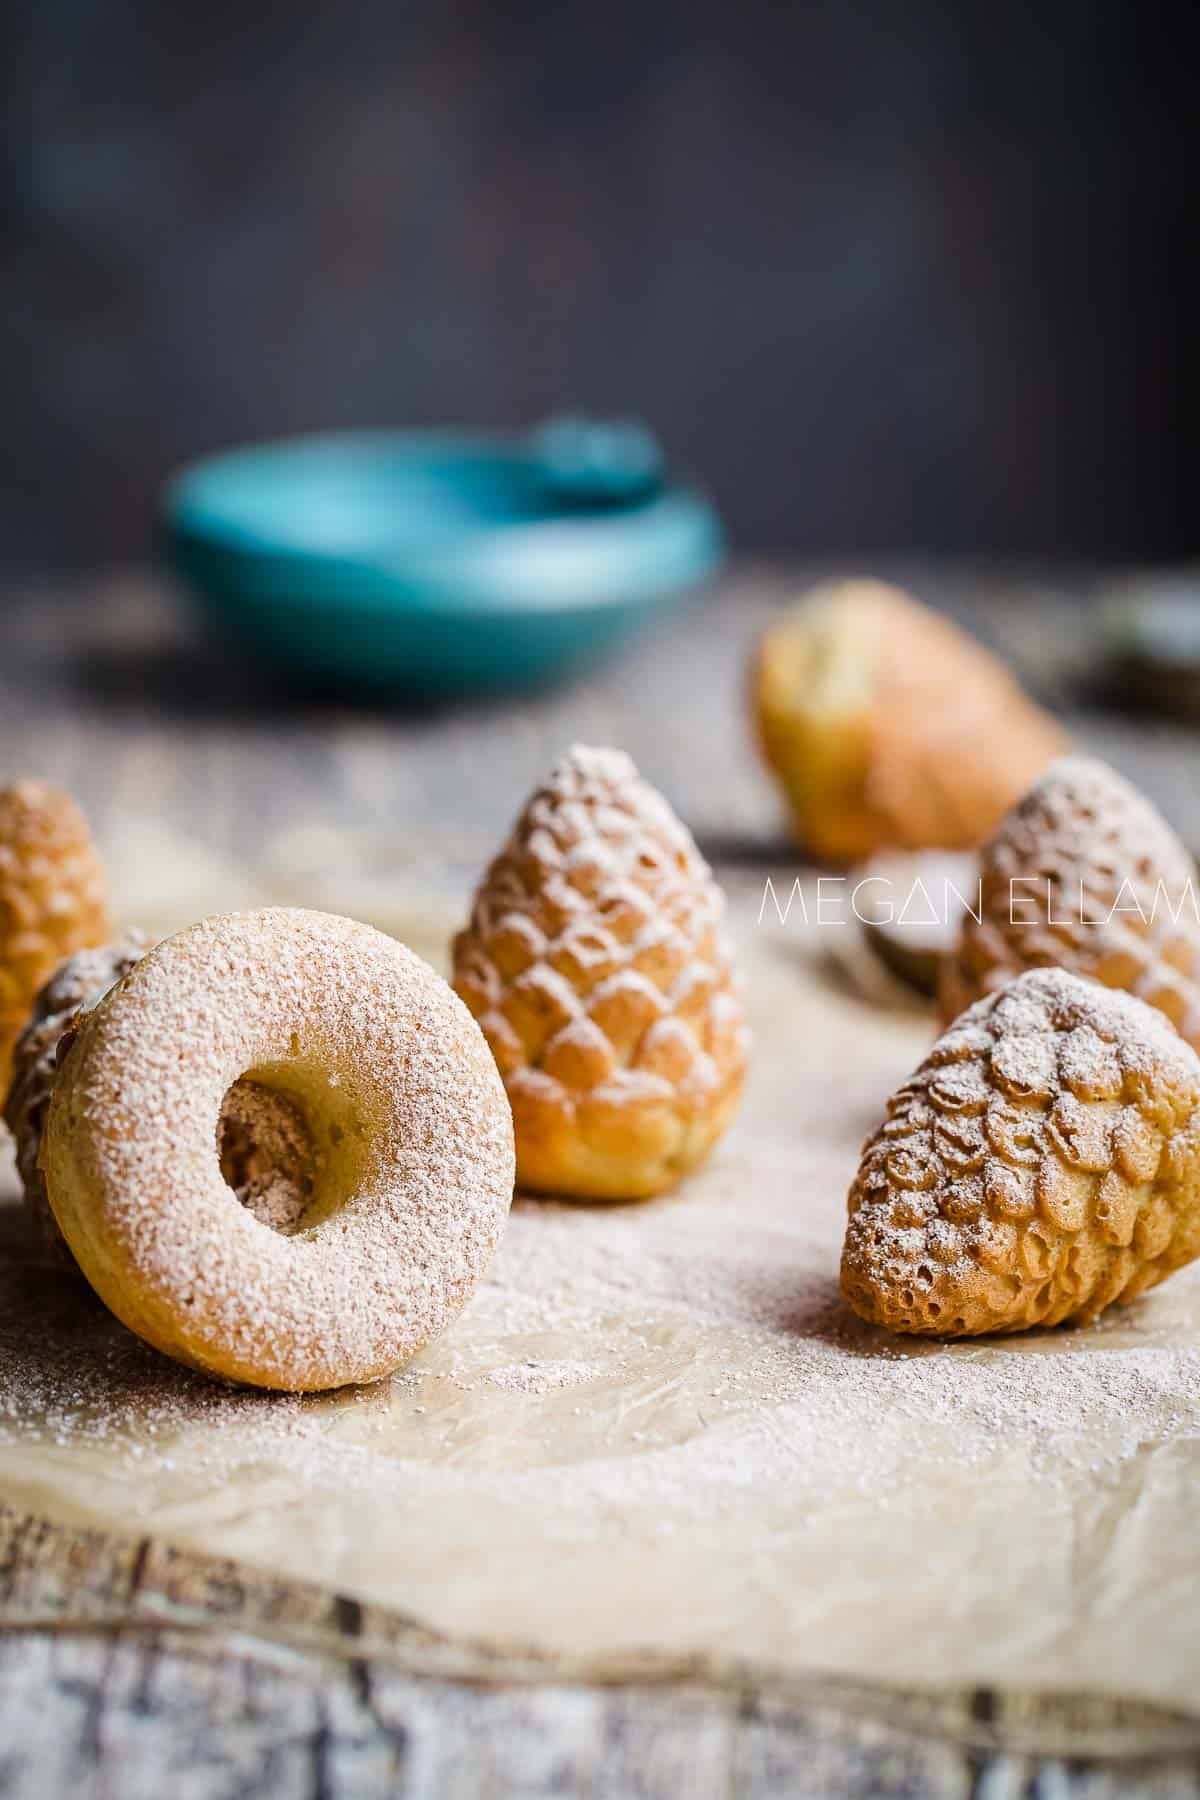 Baked donuts in different shapes coated in powdered sweetener.